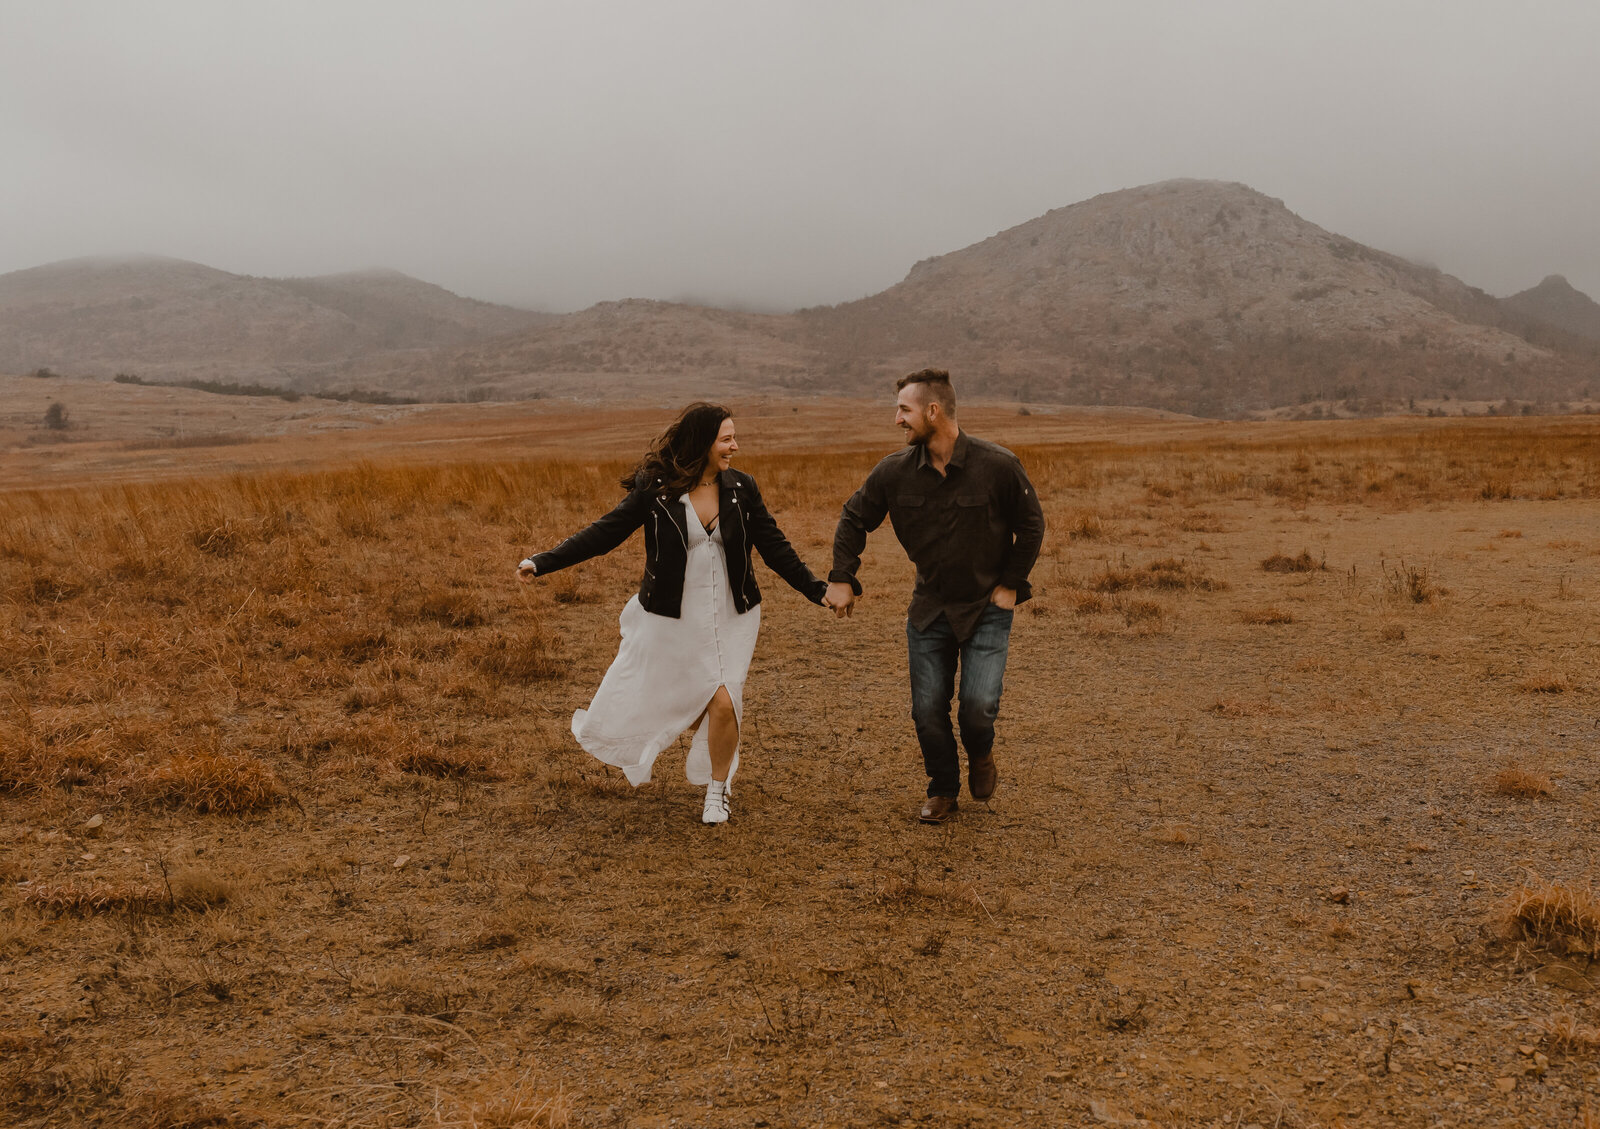 A rainy elopement day in the wichita mountains. The couple is running and having fun.